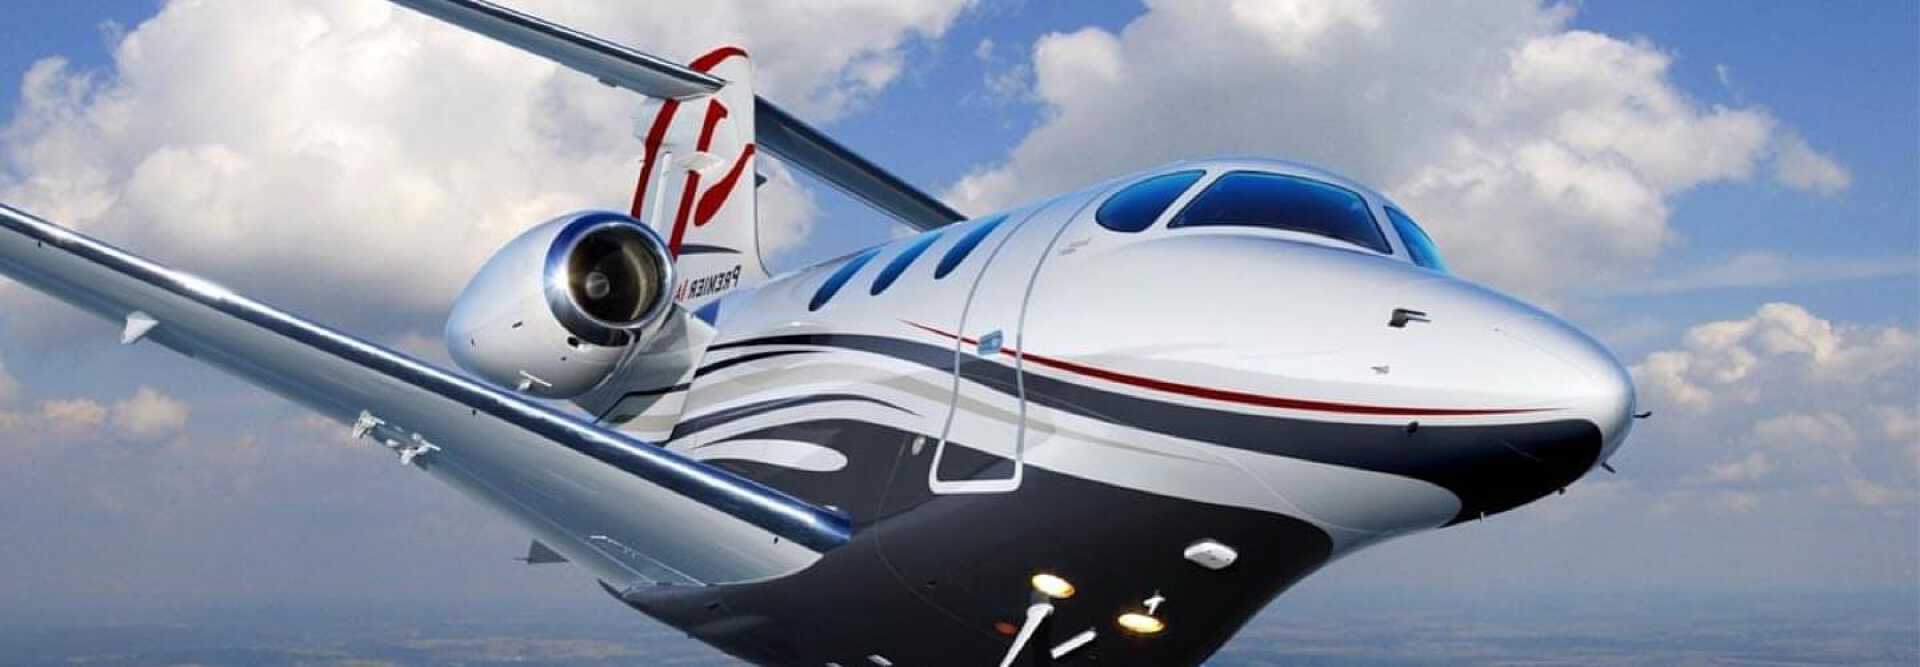 Light Jet Hawker Beechcraft Premier 1A to charter for with LunaJets, spacious, combination of performance and comfort, short-haul flights